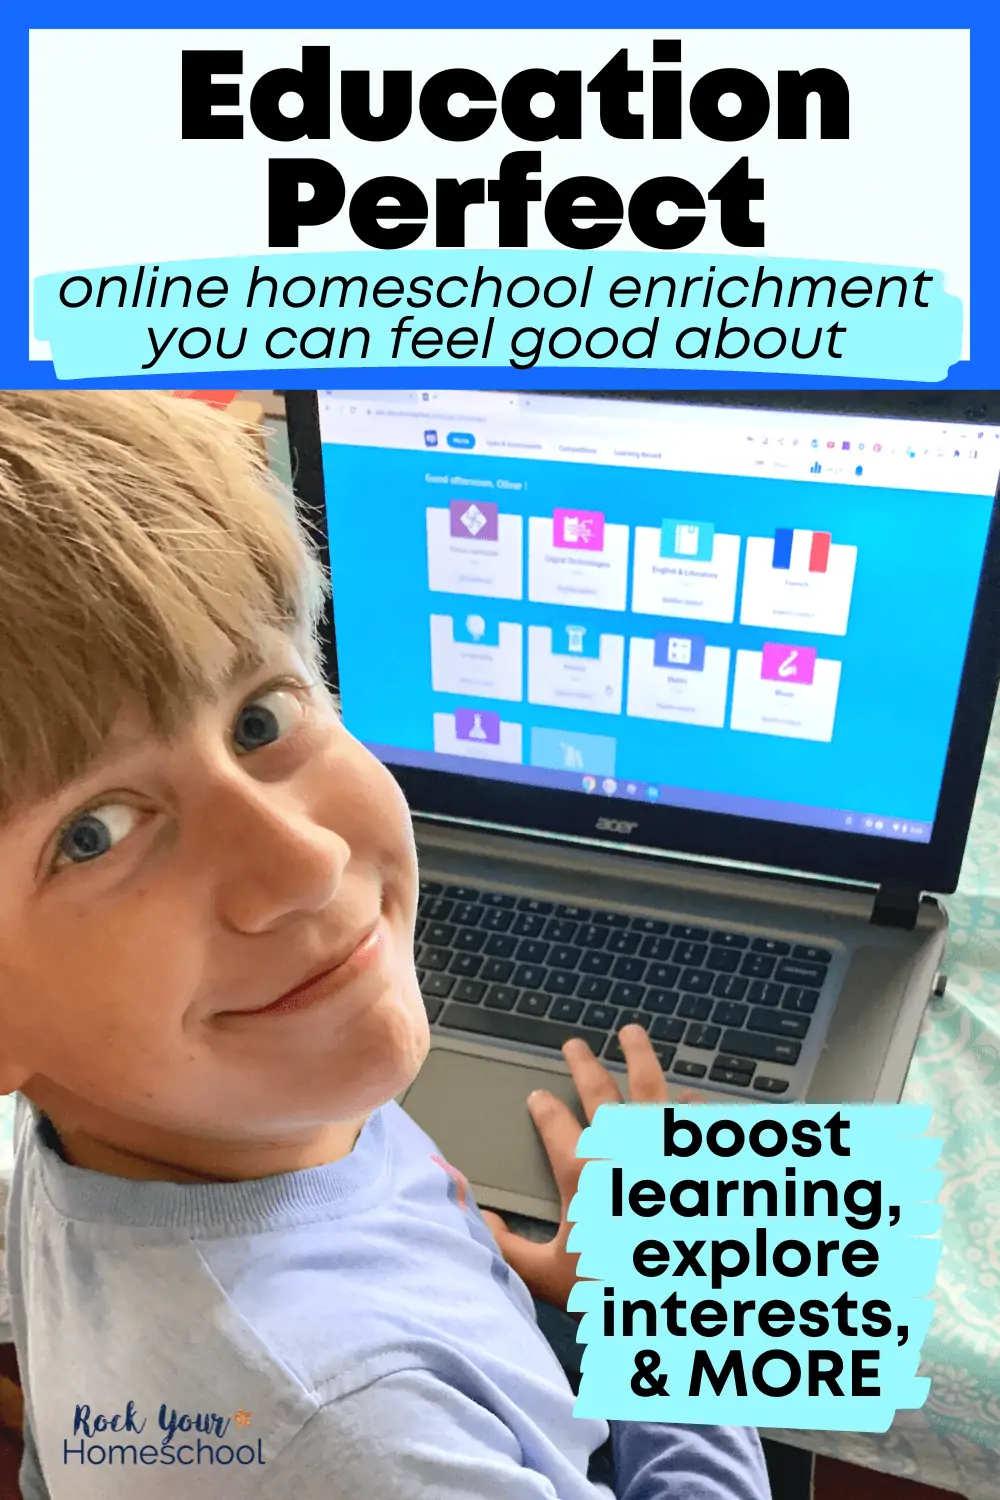 Education Perfect: Online Homeschool Enrichment You Can Feel Good About